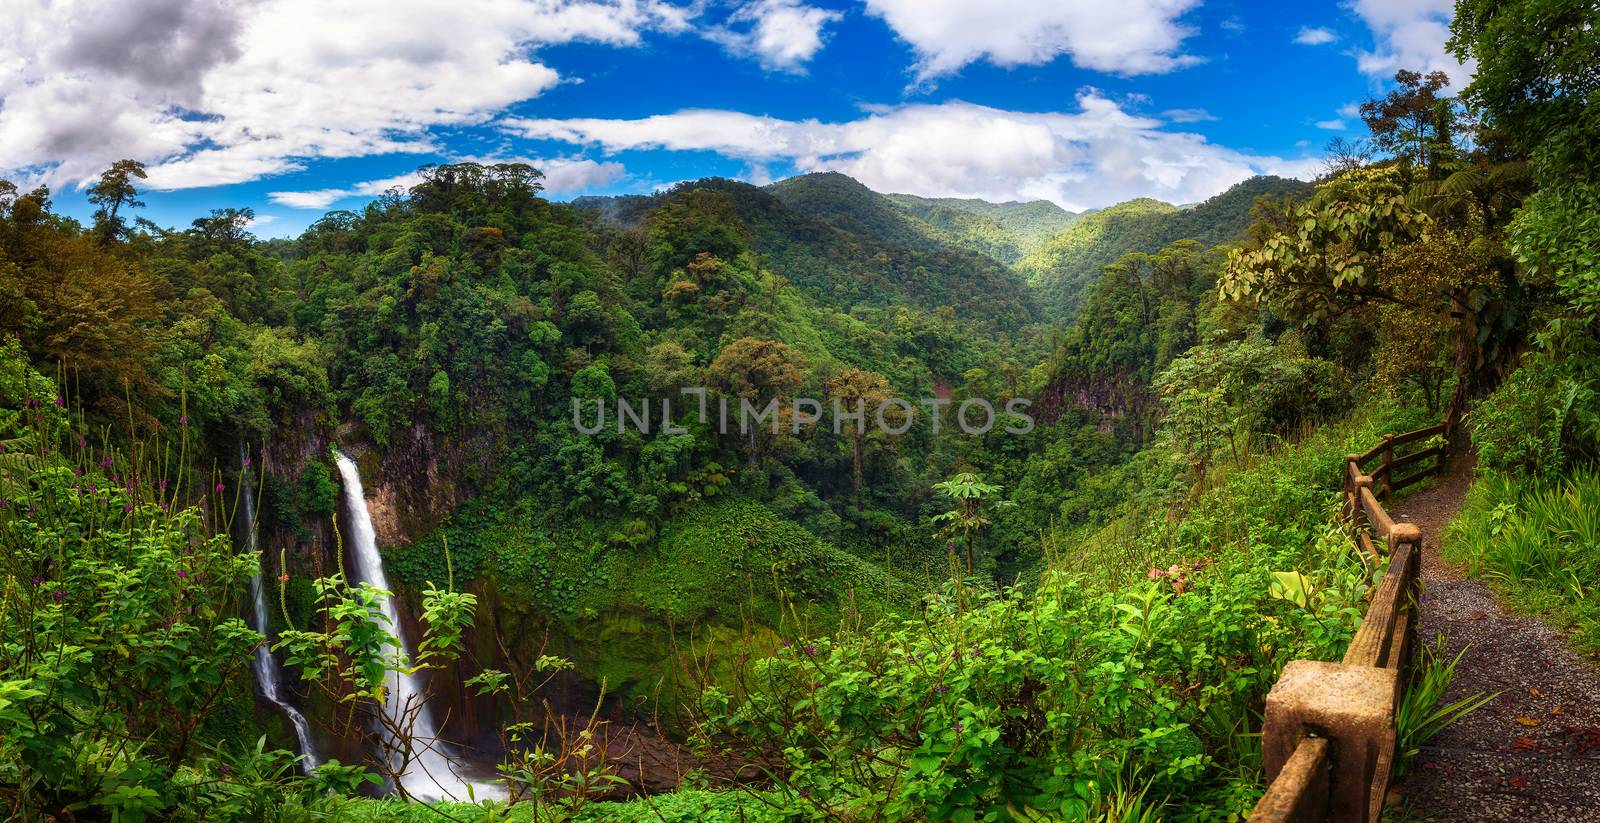 Panorama of the Catarata del Toro waterfall in Costa Rica with surrounding mountains. This waterfall is located in Juan Castro Blanco National Park on the Toro Amarillo River and is 90m high.